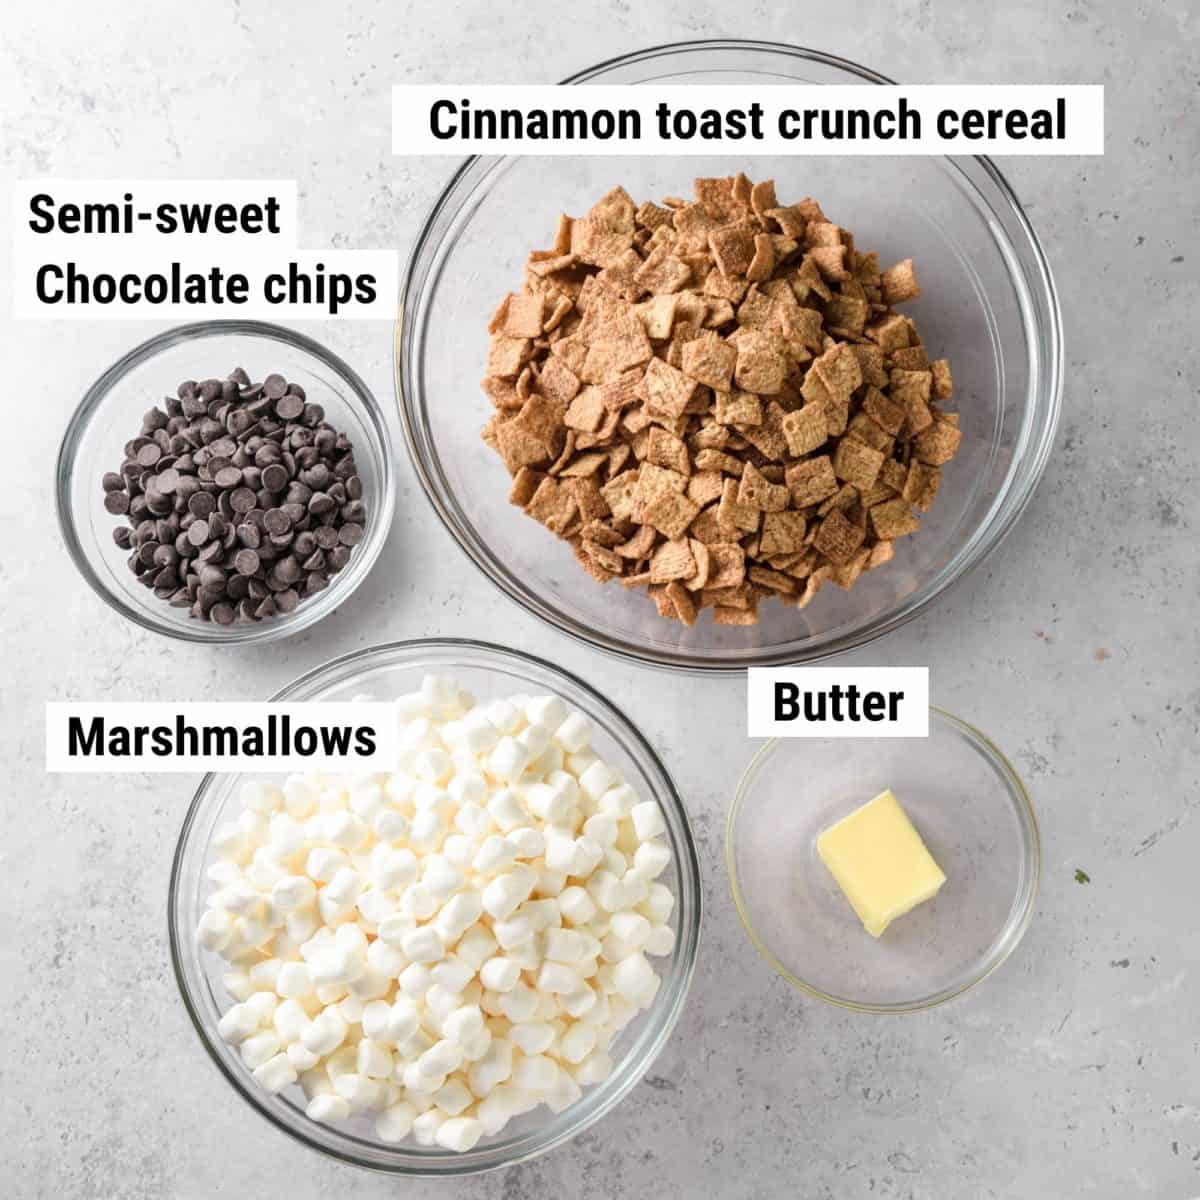 The ingredients used to make cinnamon toast crunch bars laid out on a table.